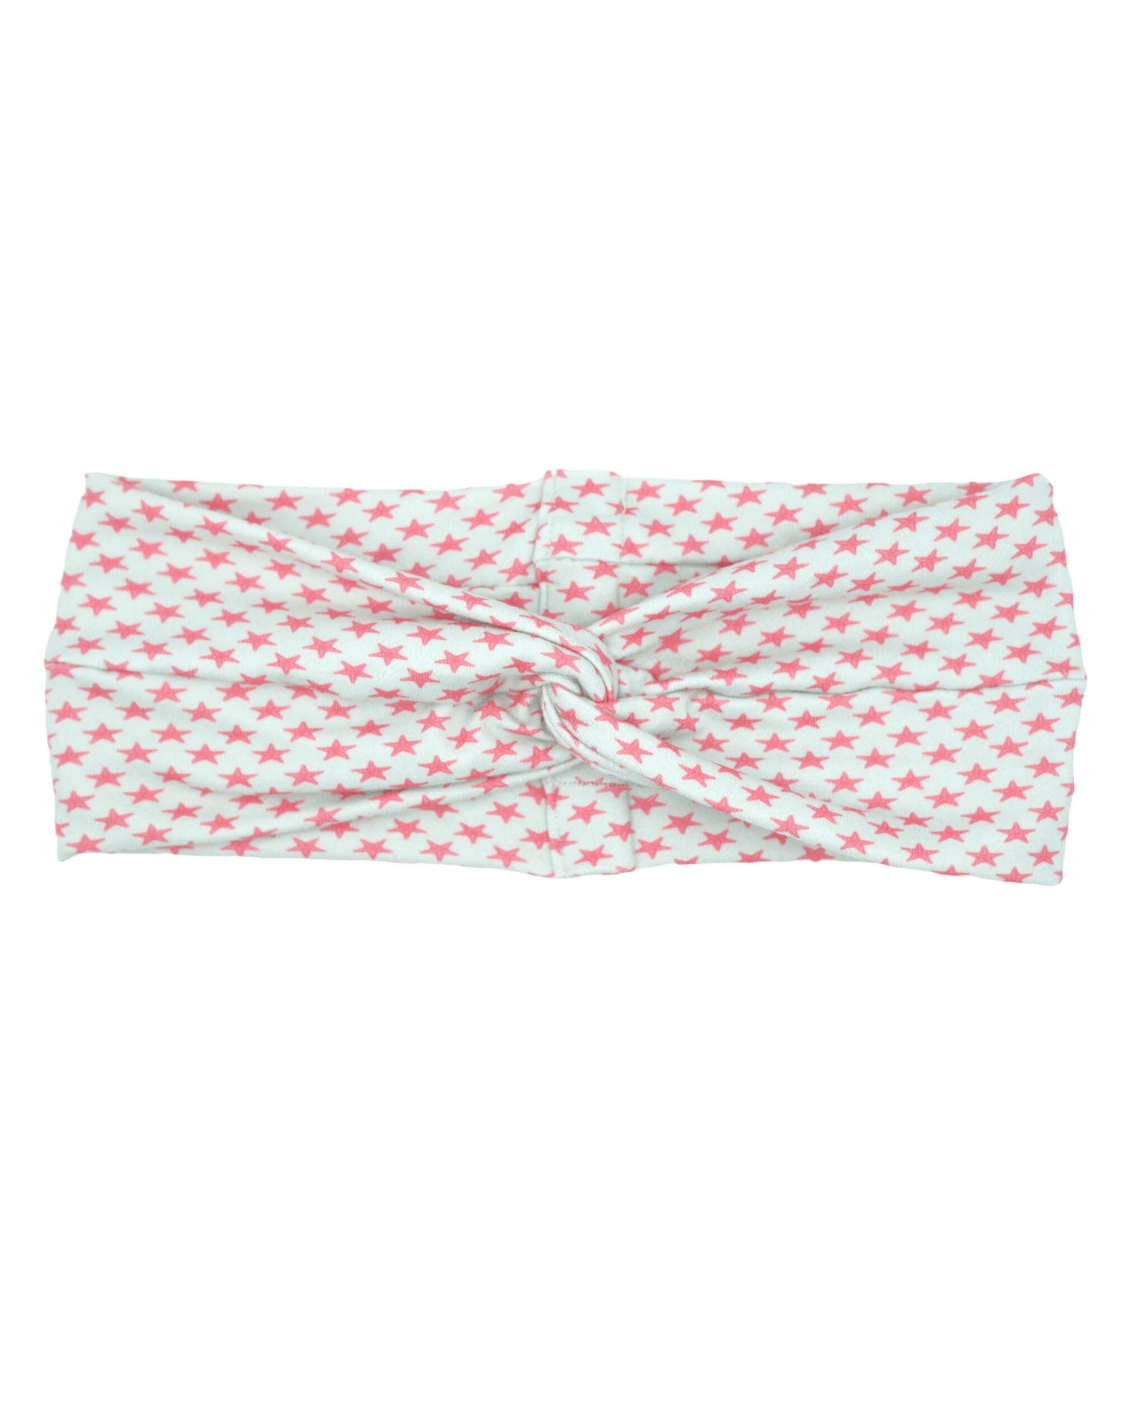 A turban headband for women featuring a starfish pattern from By Bella Boutique.